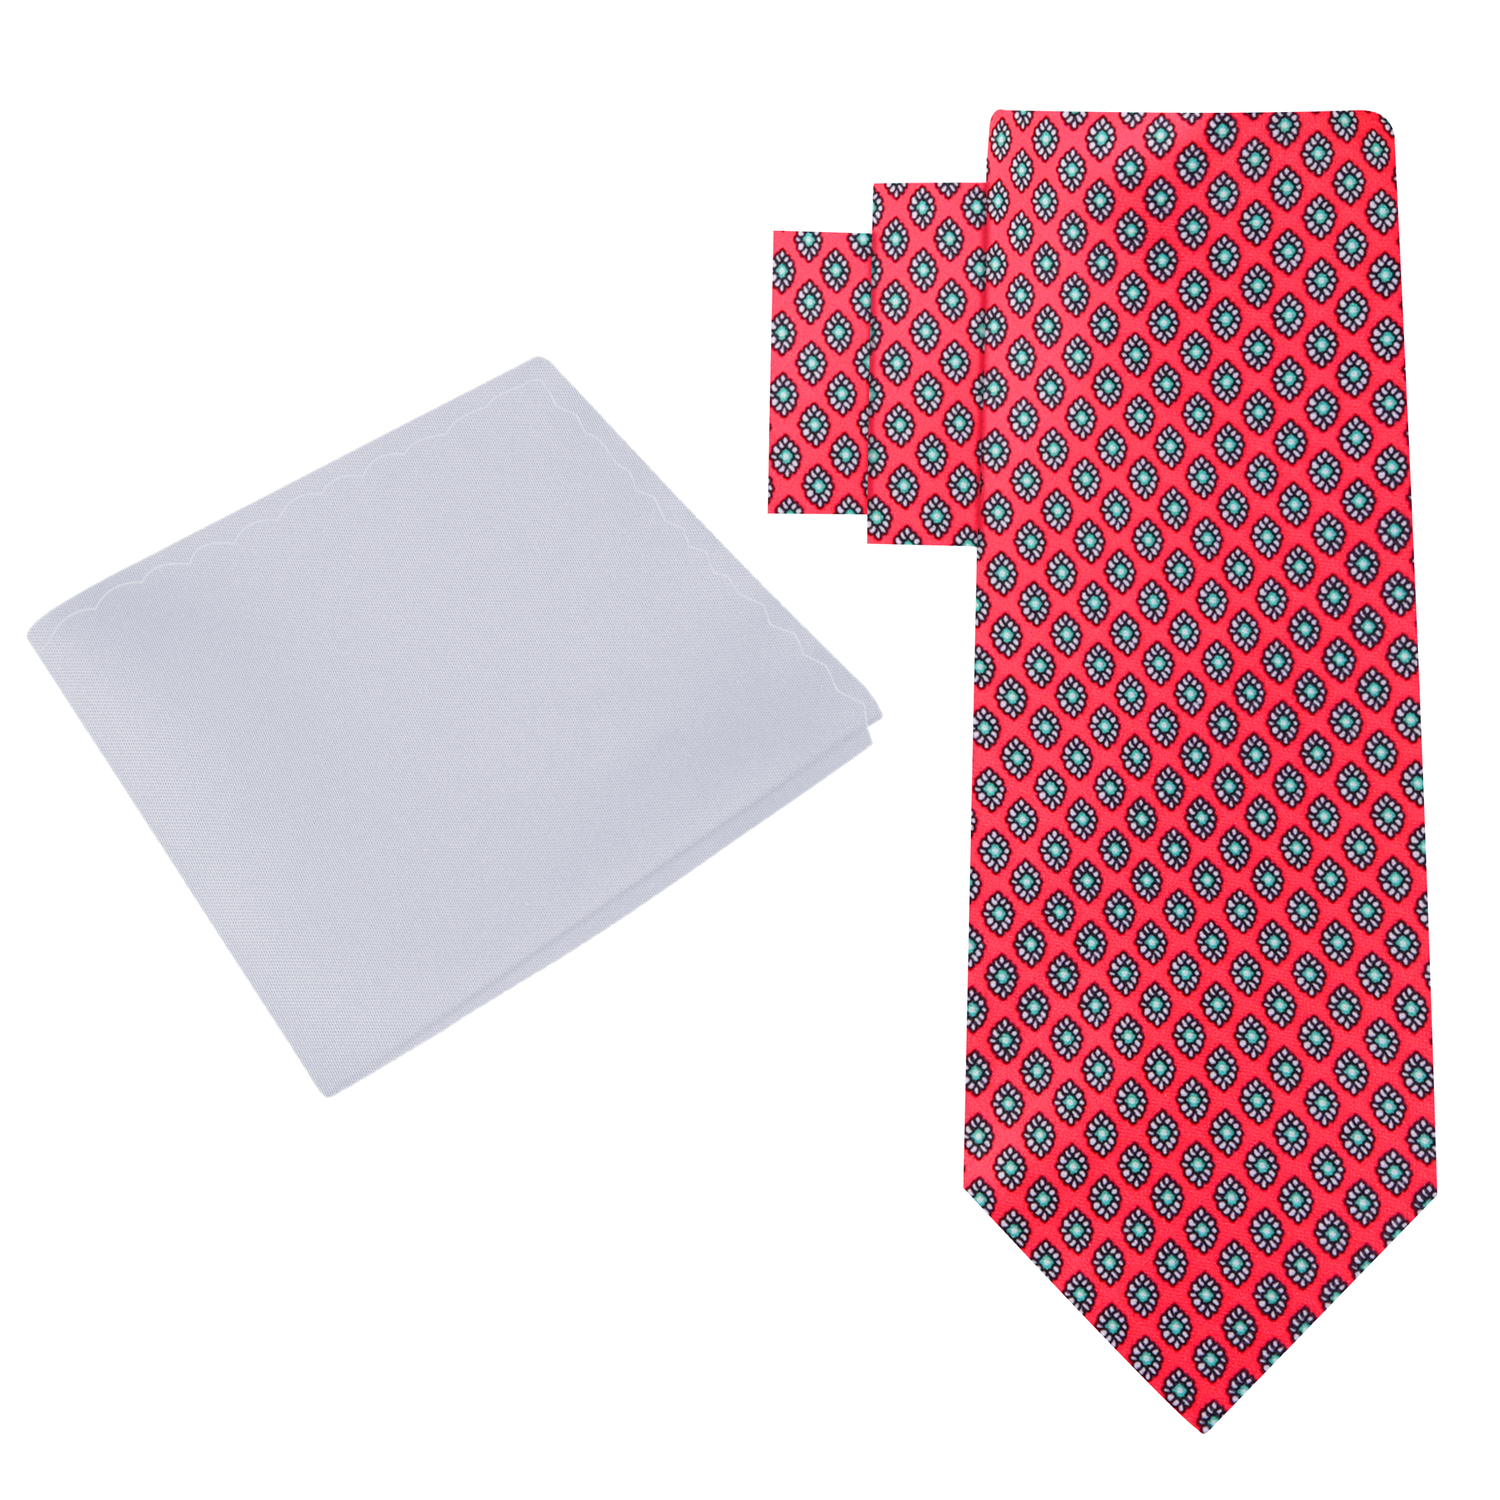 Alt view: Red Small Medallion Tie and Light Grey Square